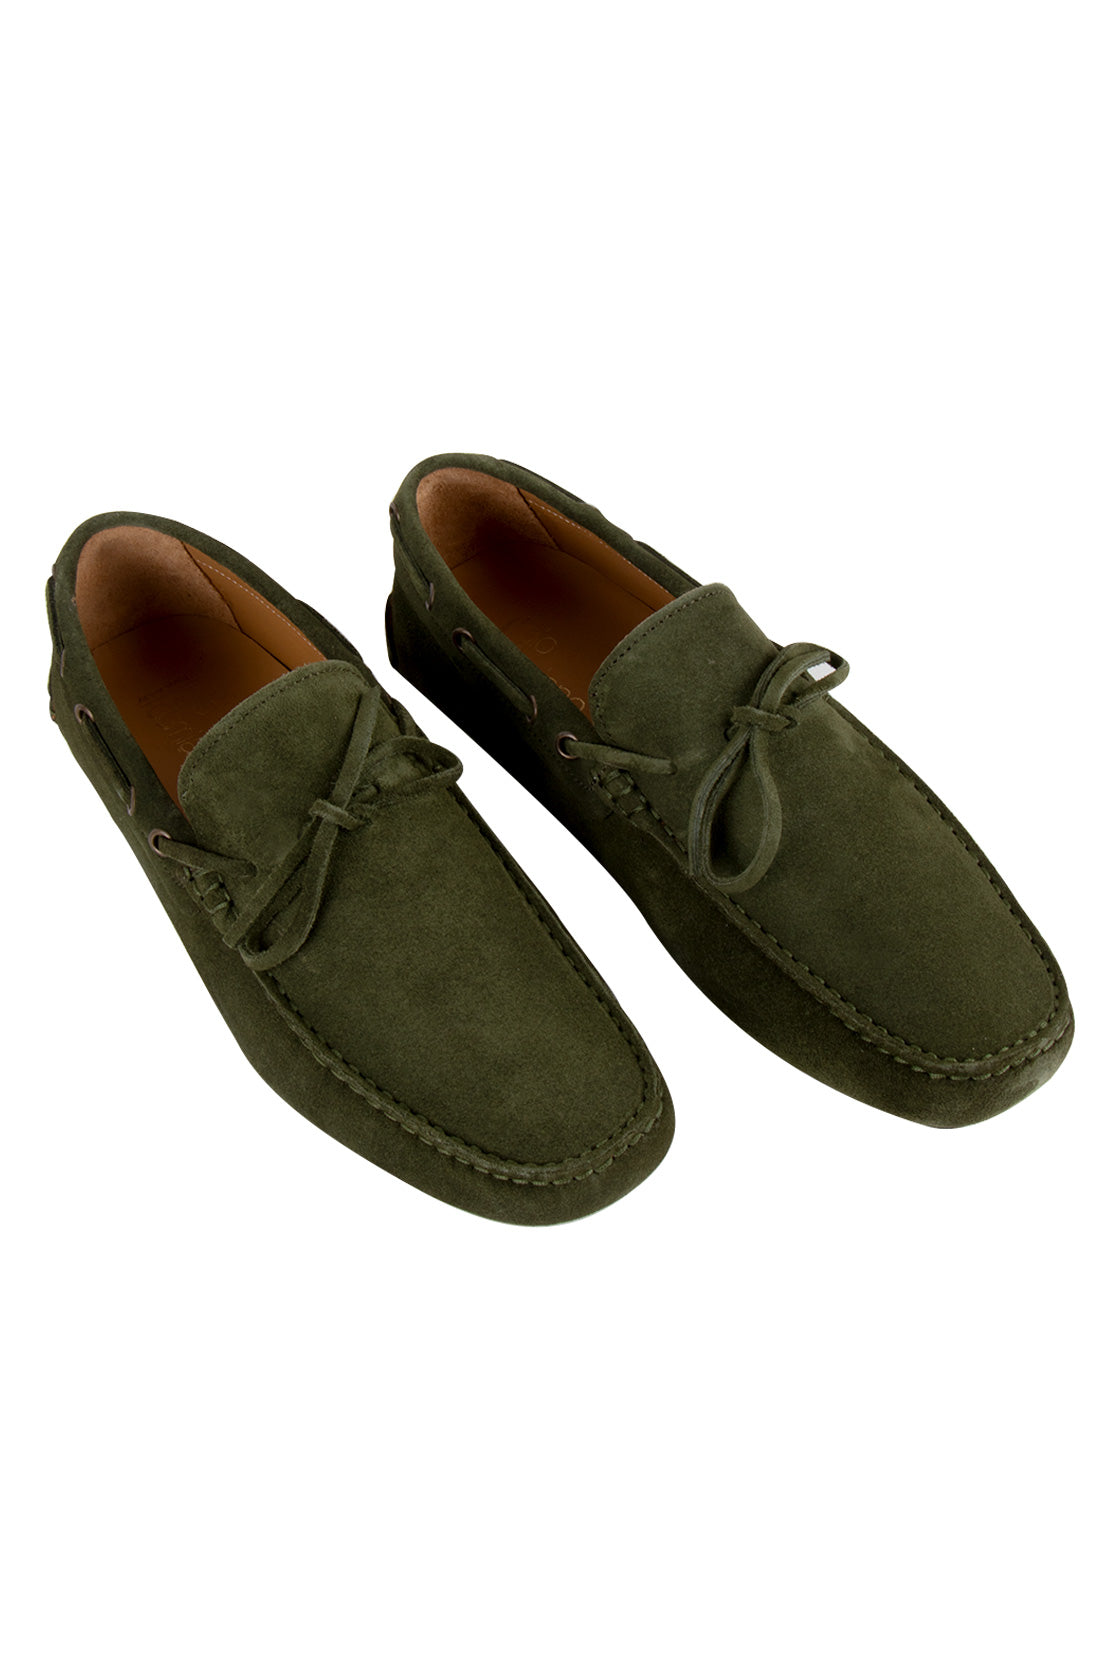 Gio Damiano Camoscio Suede Loafers Olive